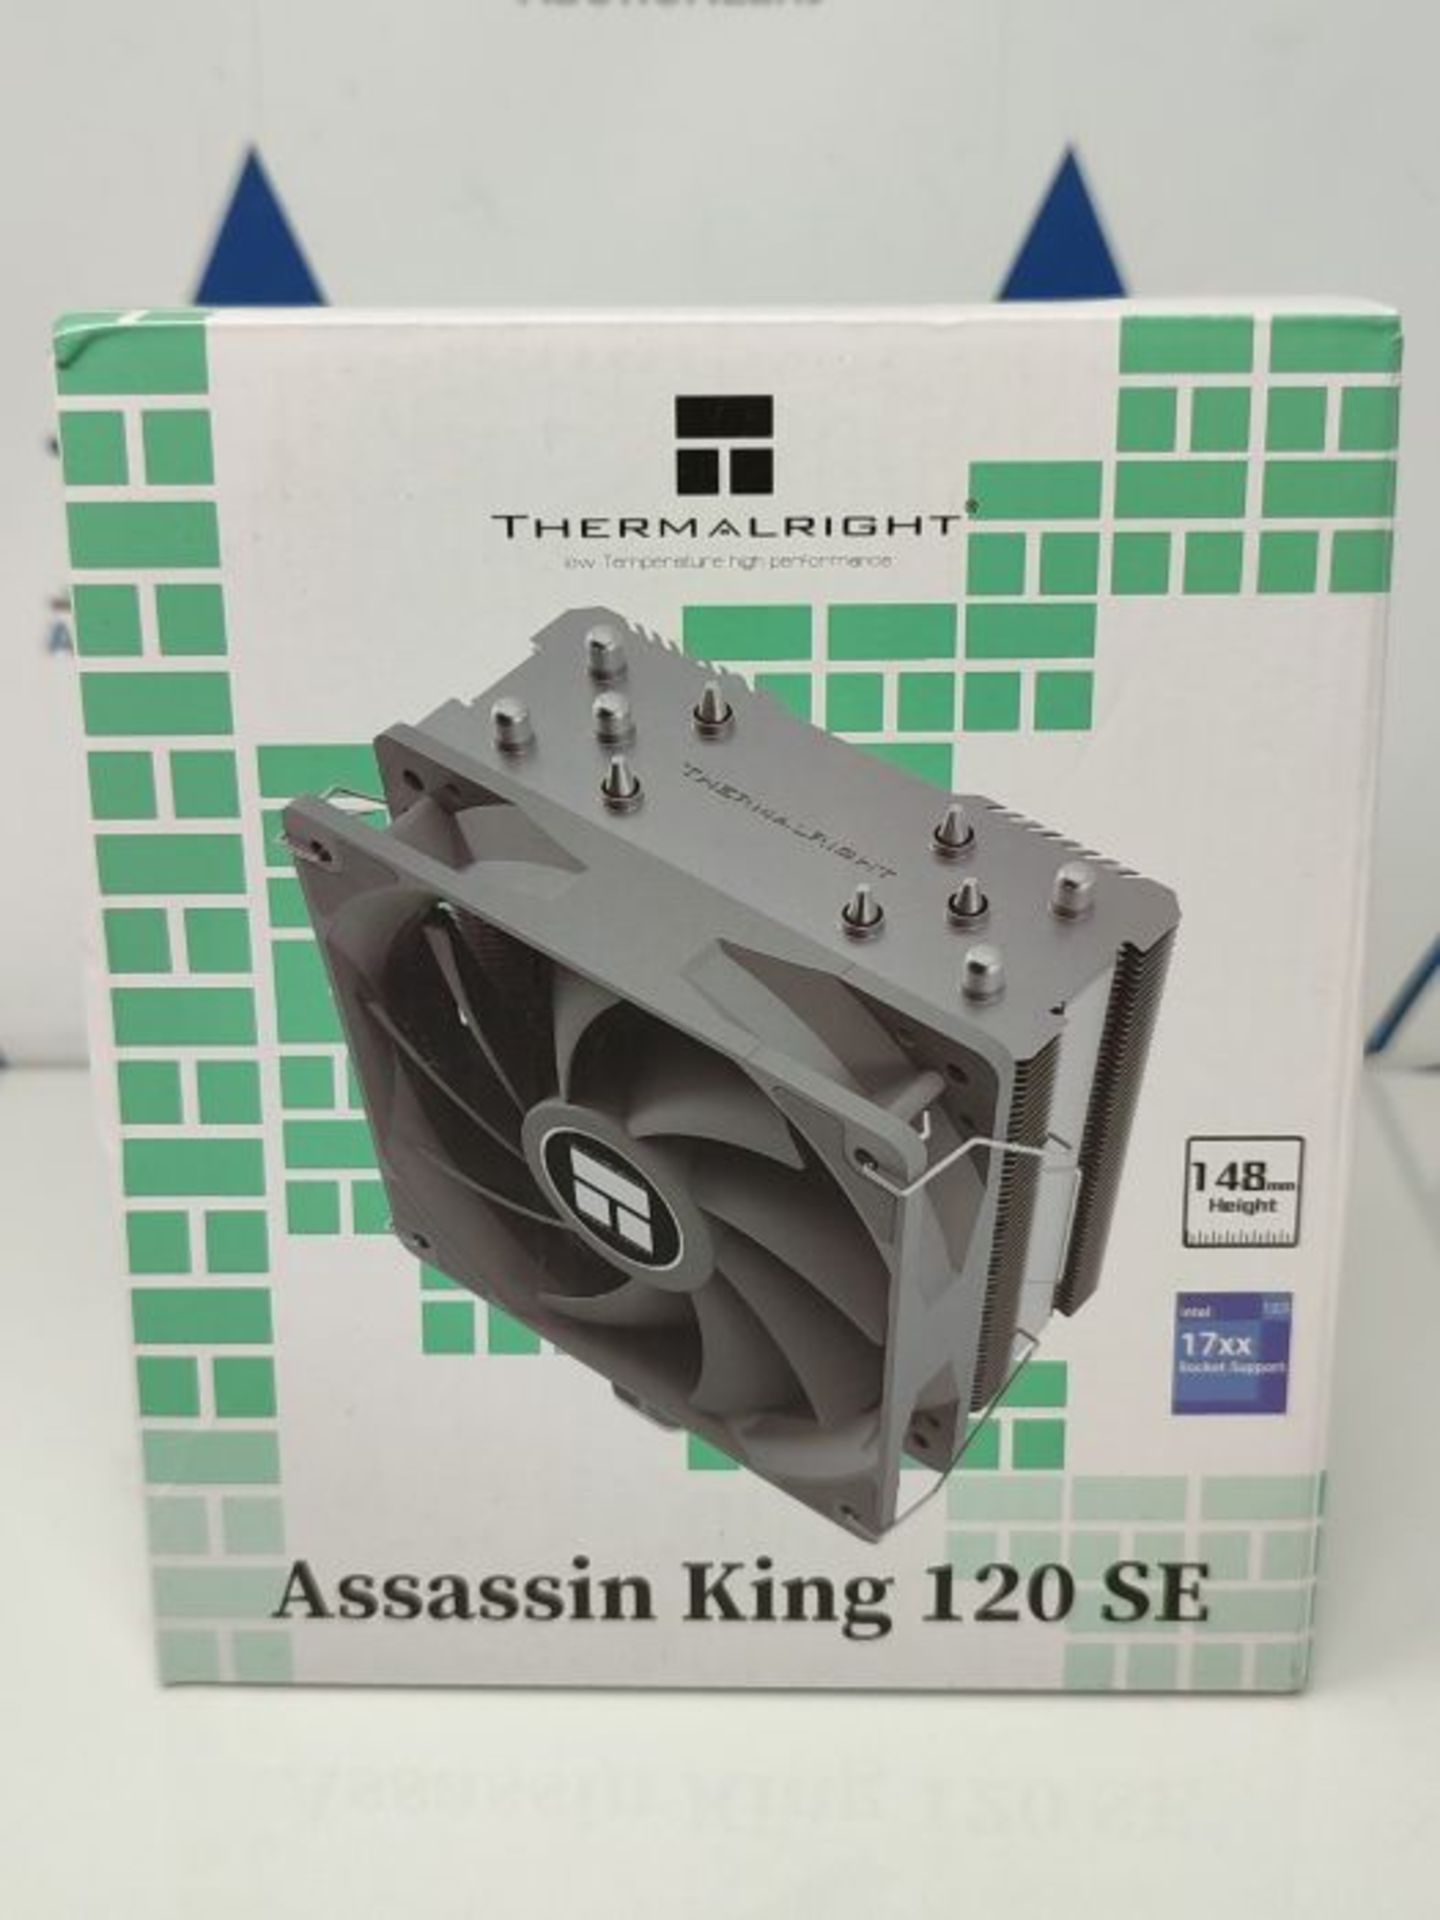 Thermalright Assassin King 120 SE CPU Air Cooler, AK120 SE, 5 Heatpipes, AGHP technolo - Image 2 of 3